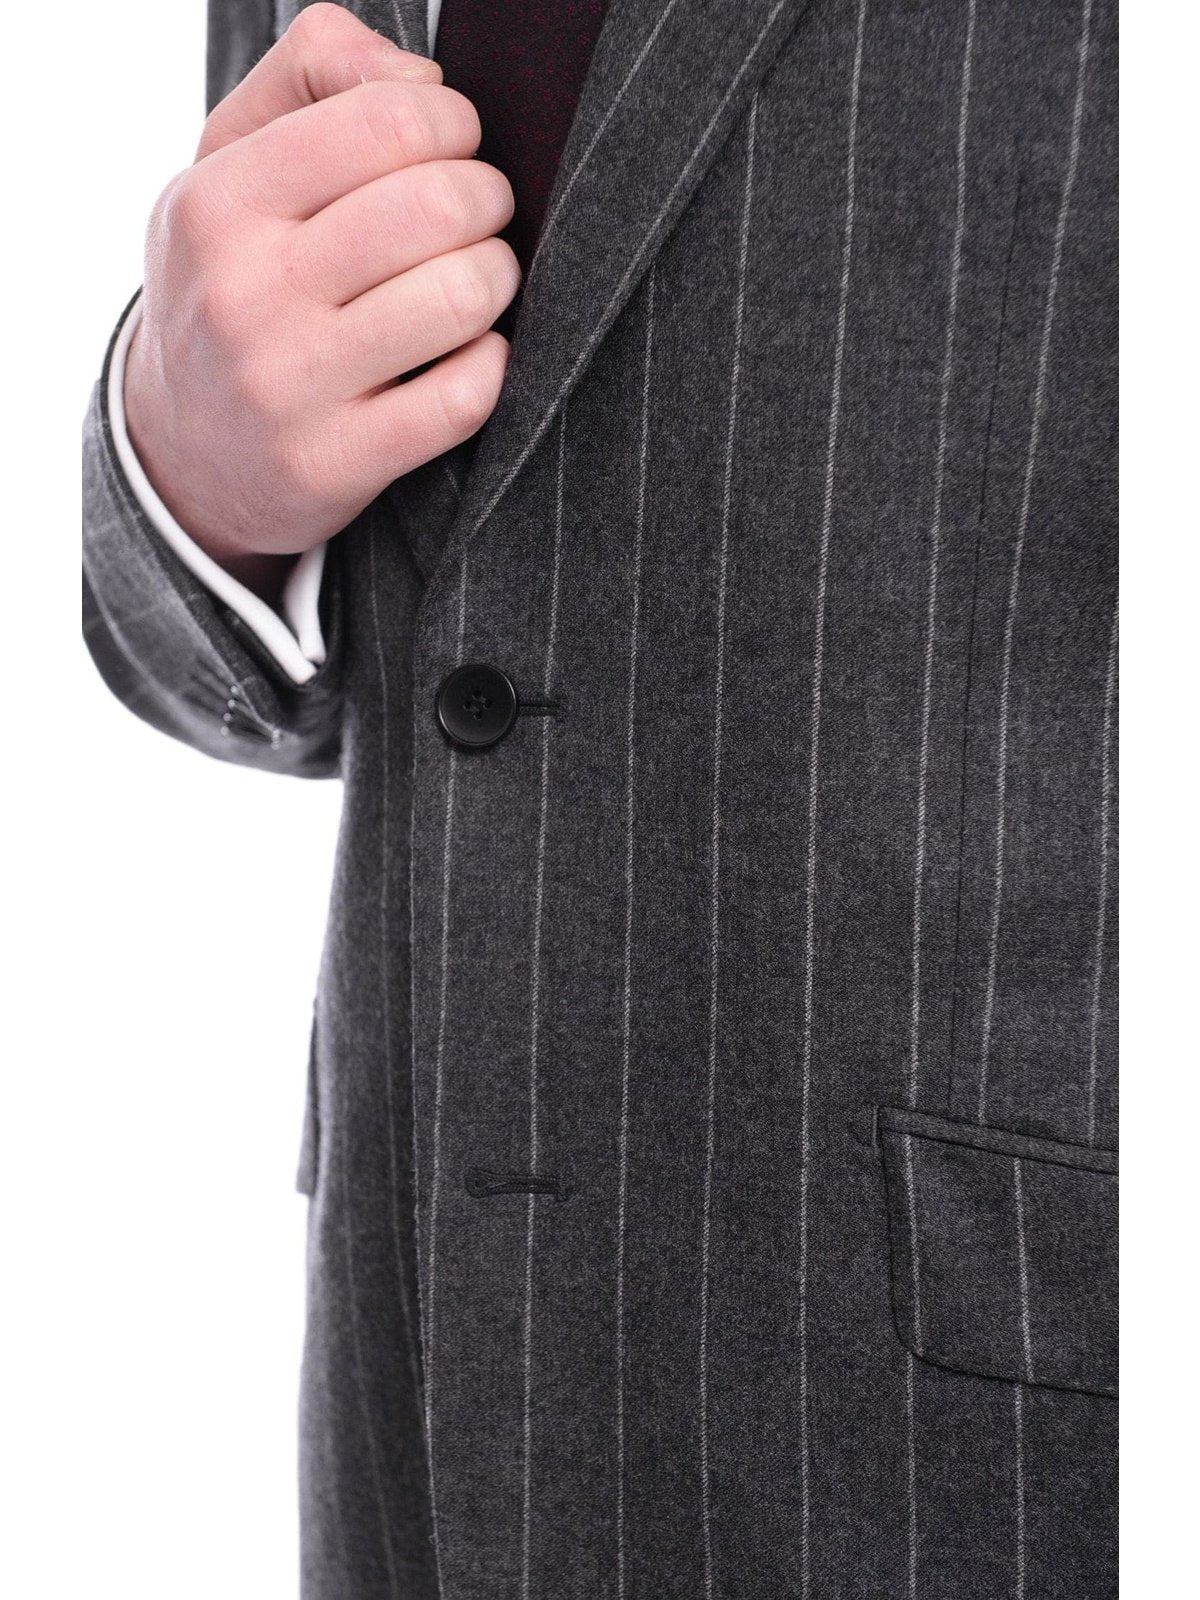 Napoli TWO PIECE SUITS Napoli Slim Fit Charcoal Gray Pinstriped Two Button Half Canvassed Wool Suit